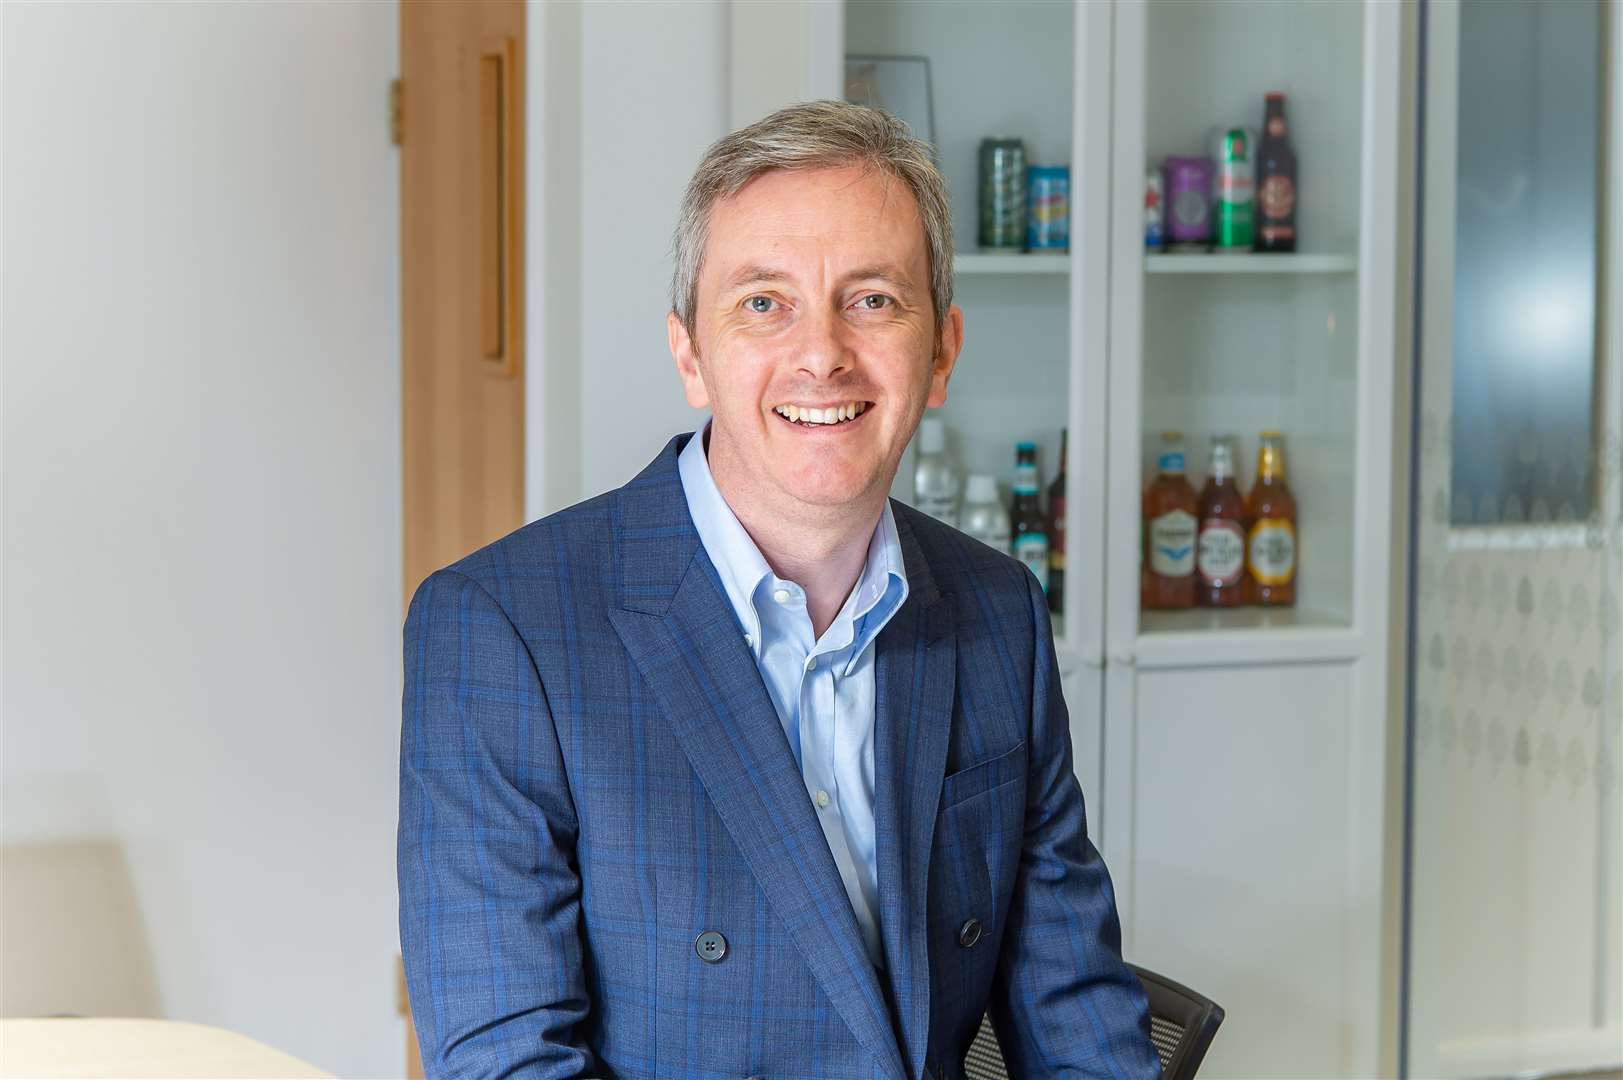 Totally Natural Solutions boss Colin Wilson founded the firm in 2013